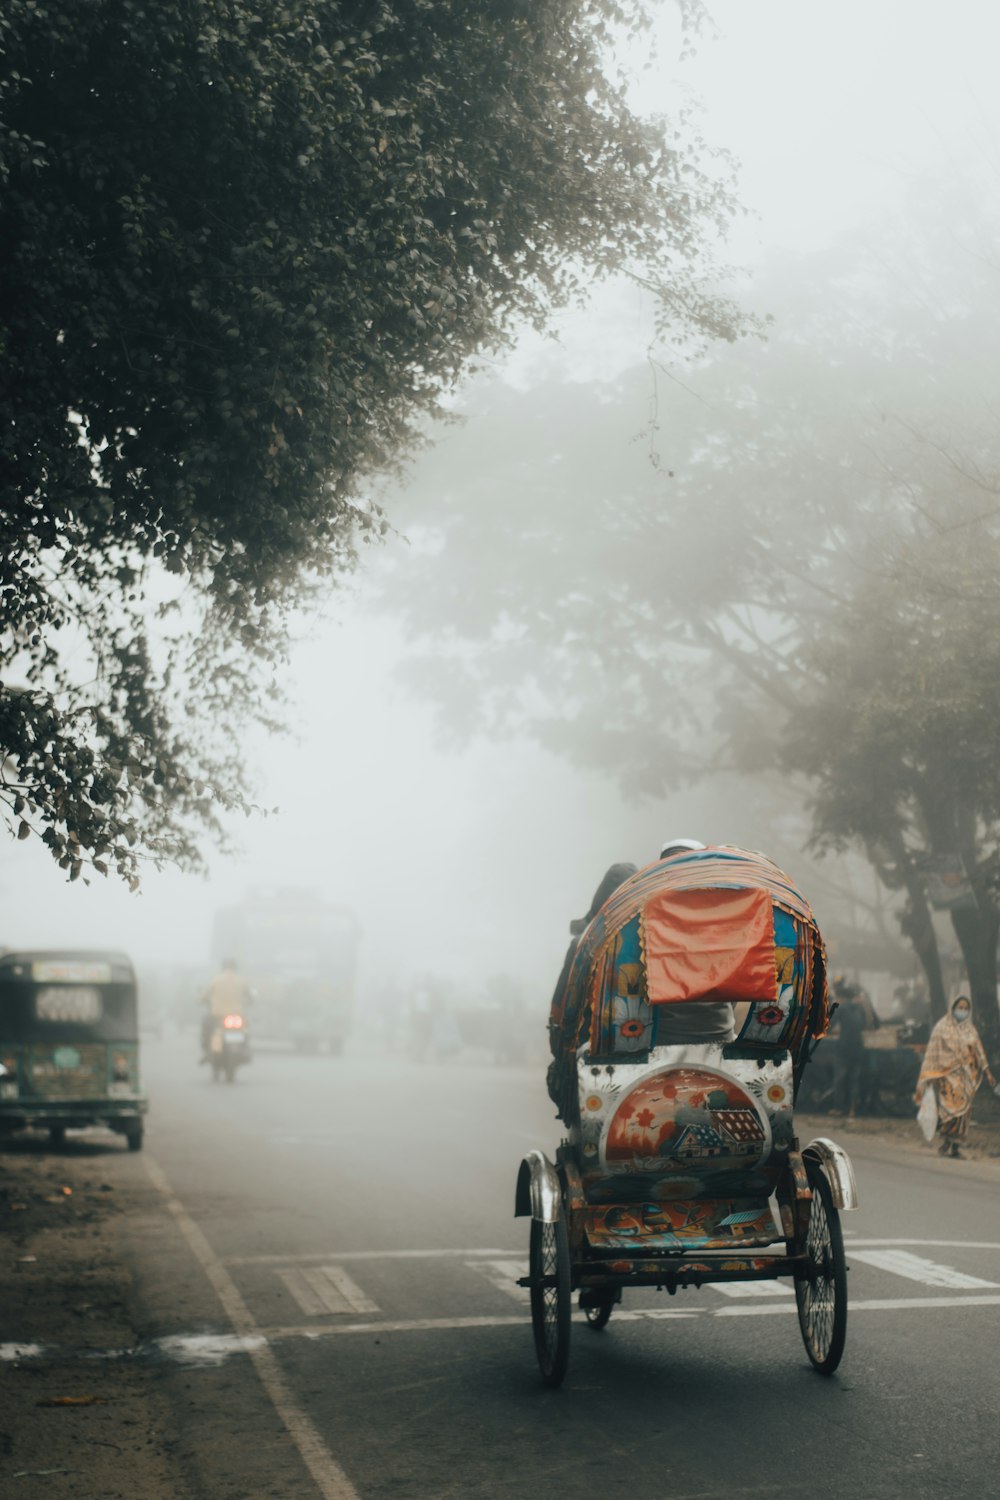 a person riding a tricycle on a foggy street